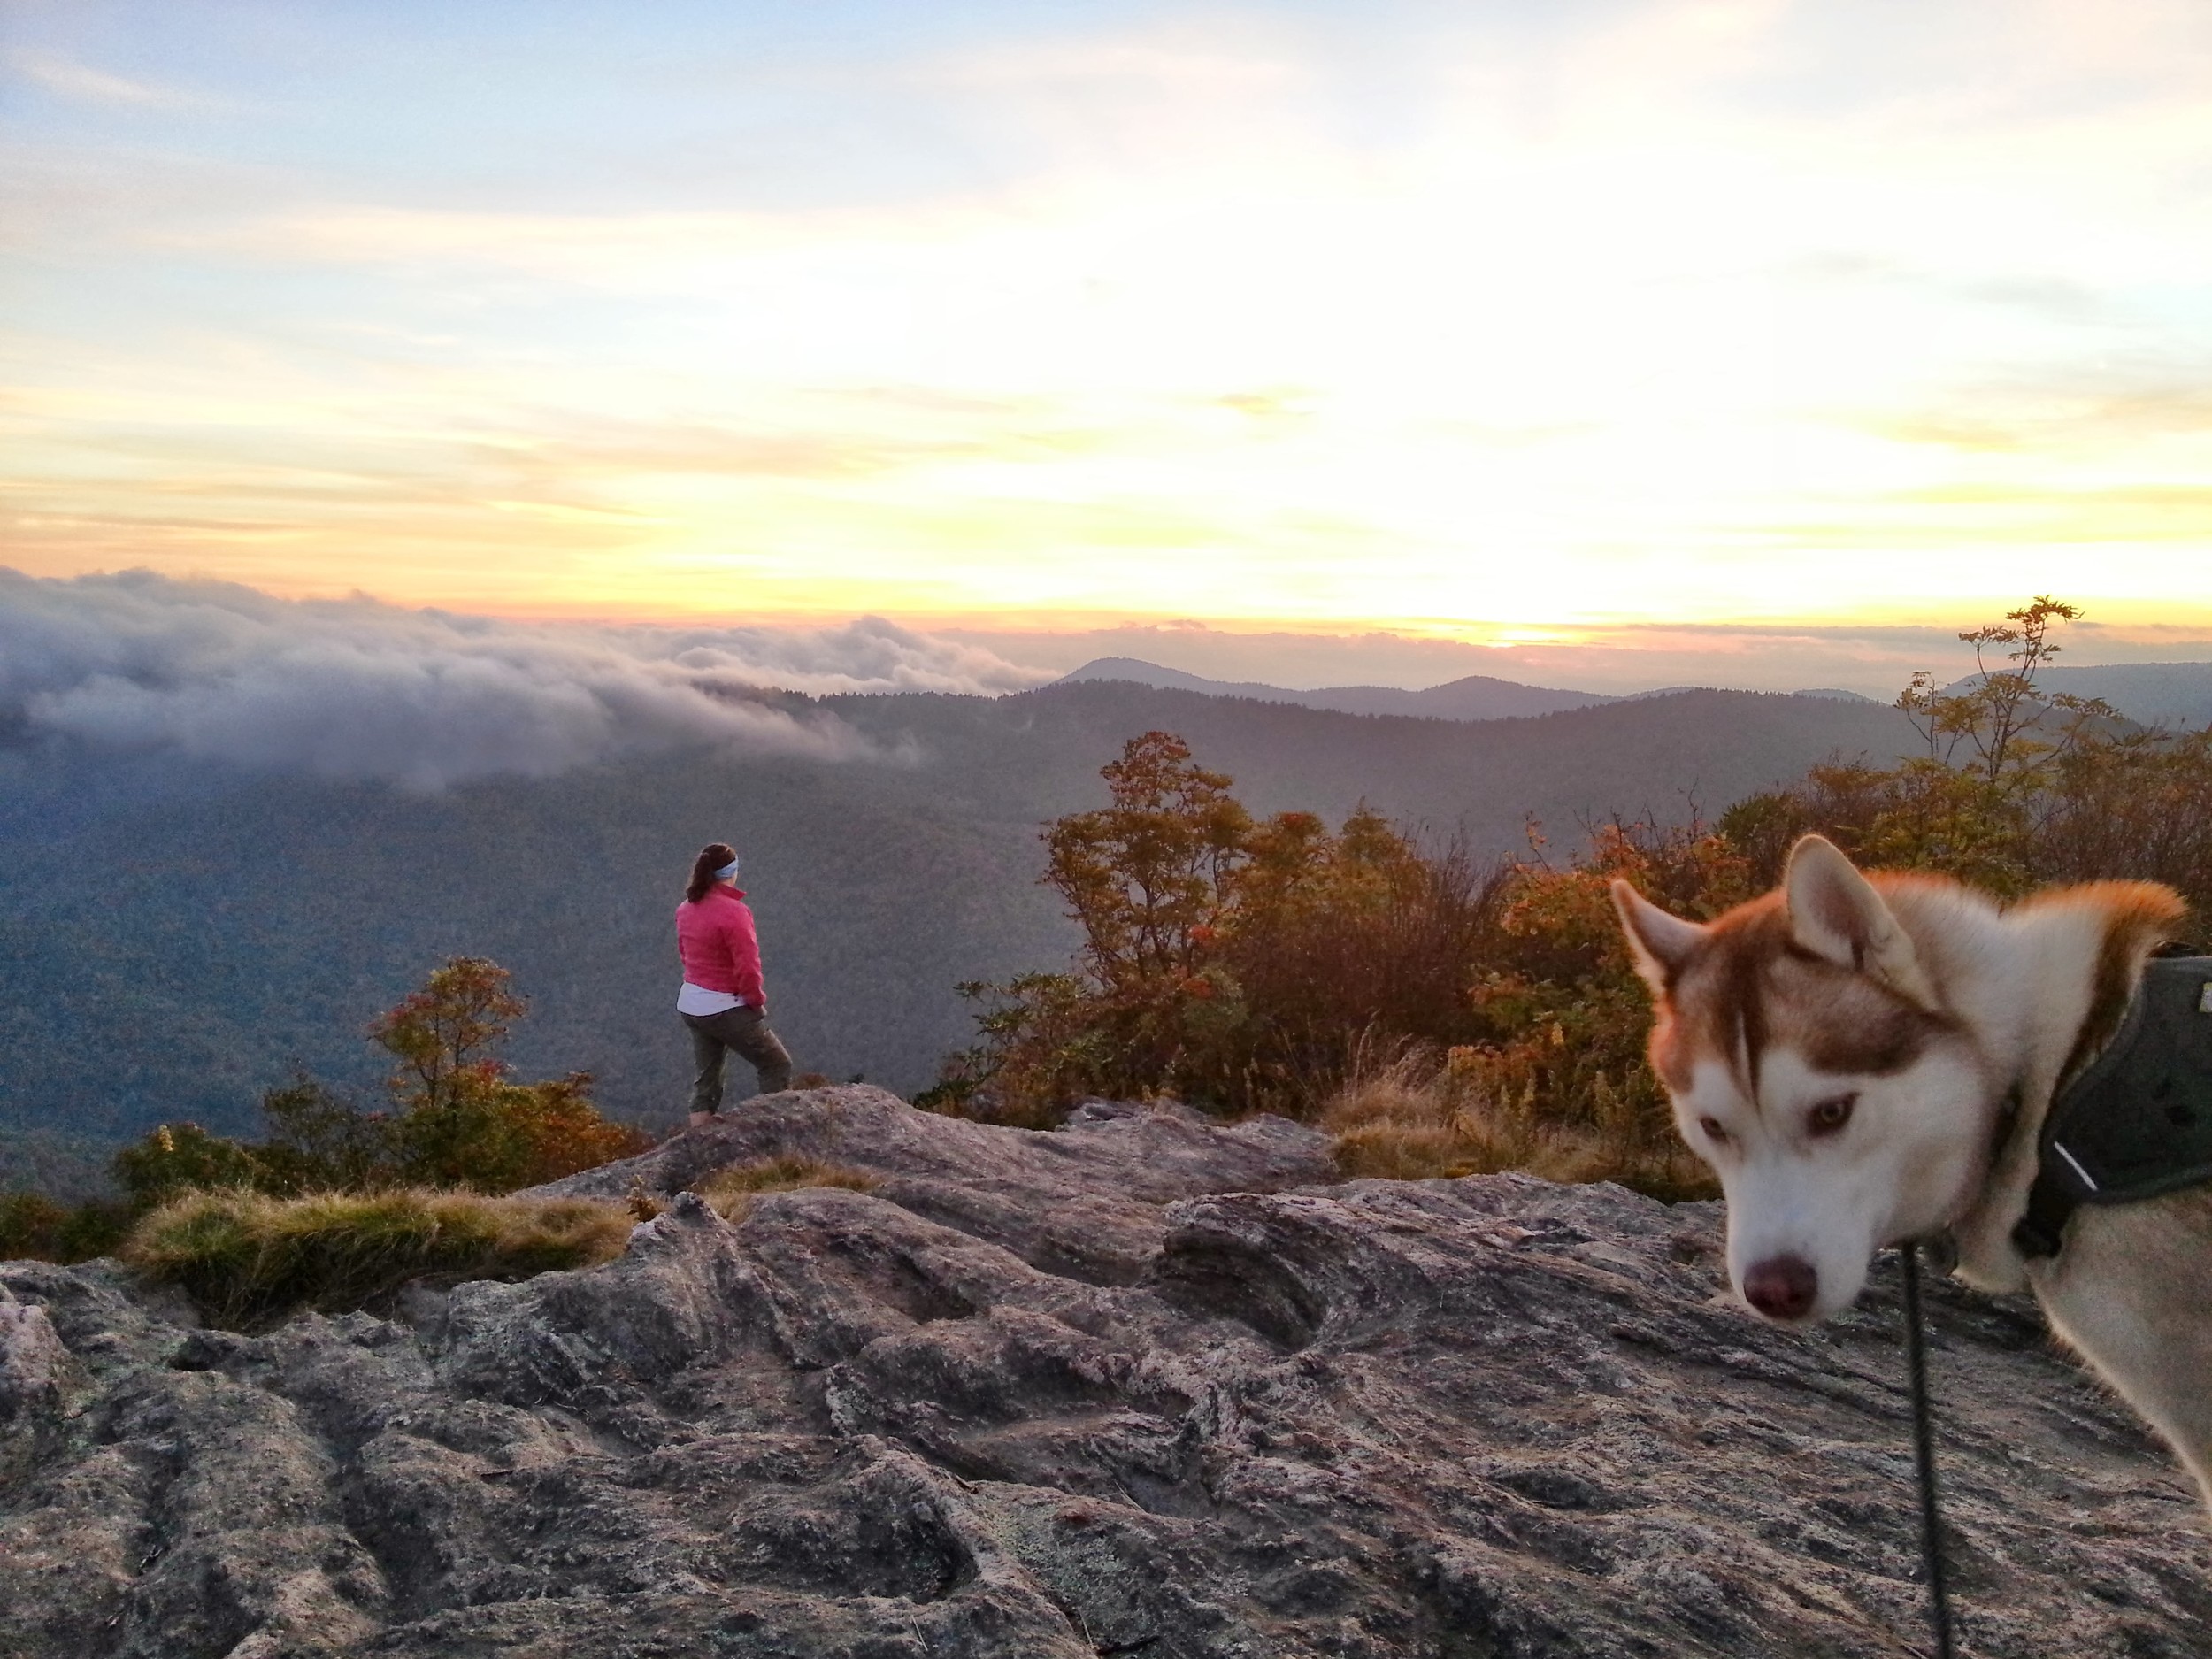 But he was not pleased when I went off to check out the view on my own (ultimate photobomb dog)